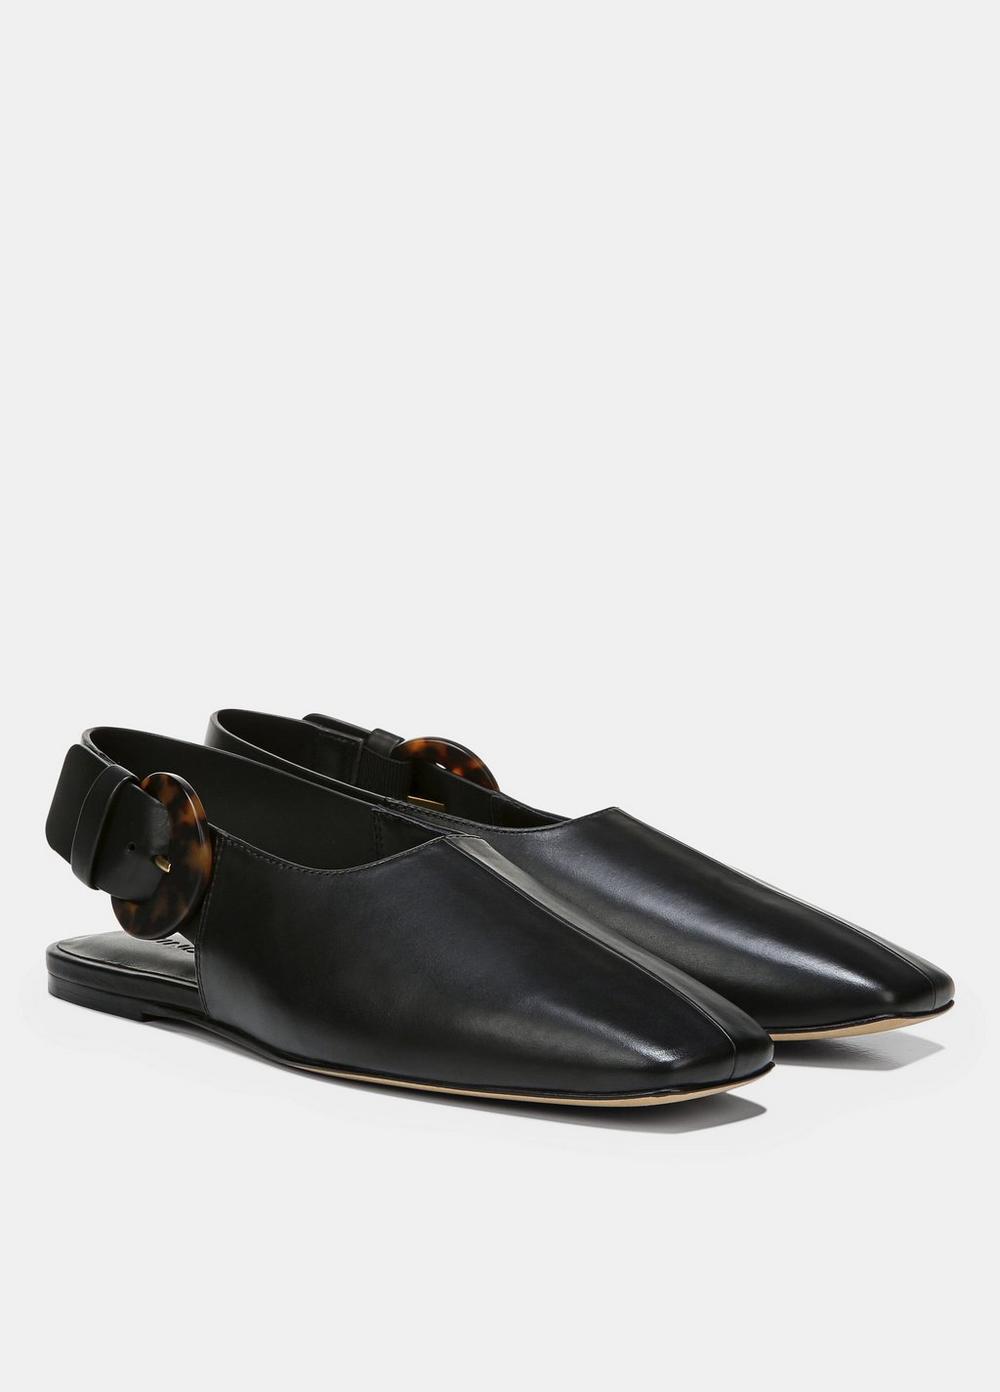 Leather Cadot Buckle Shoe